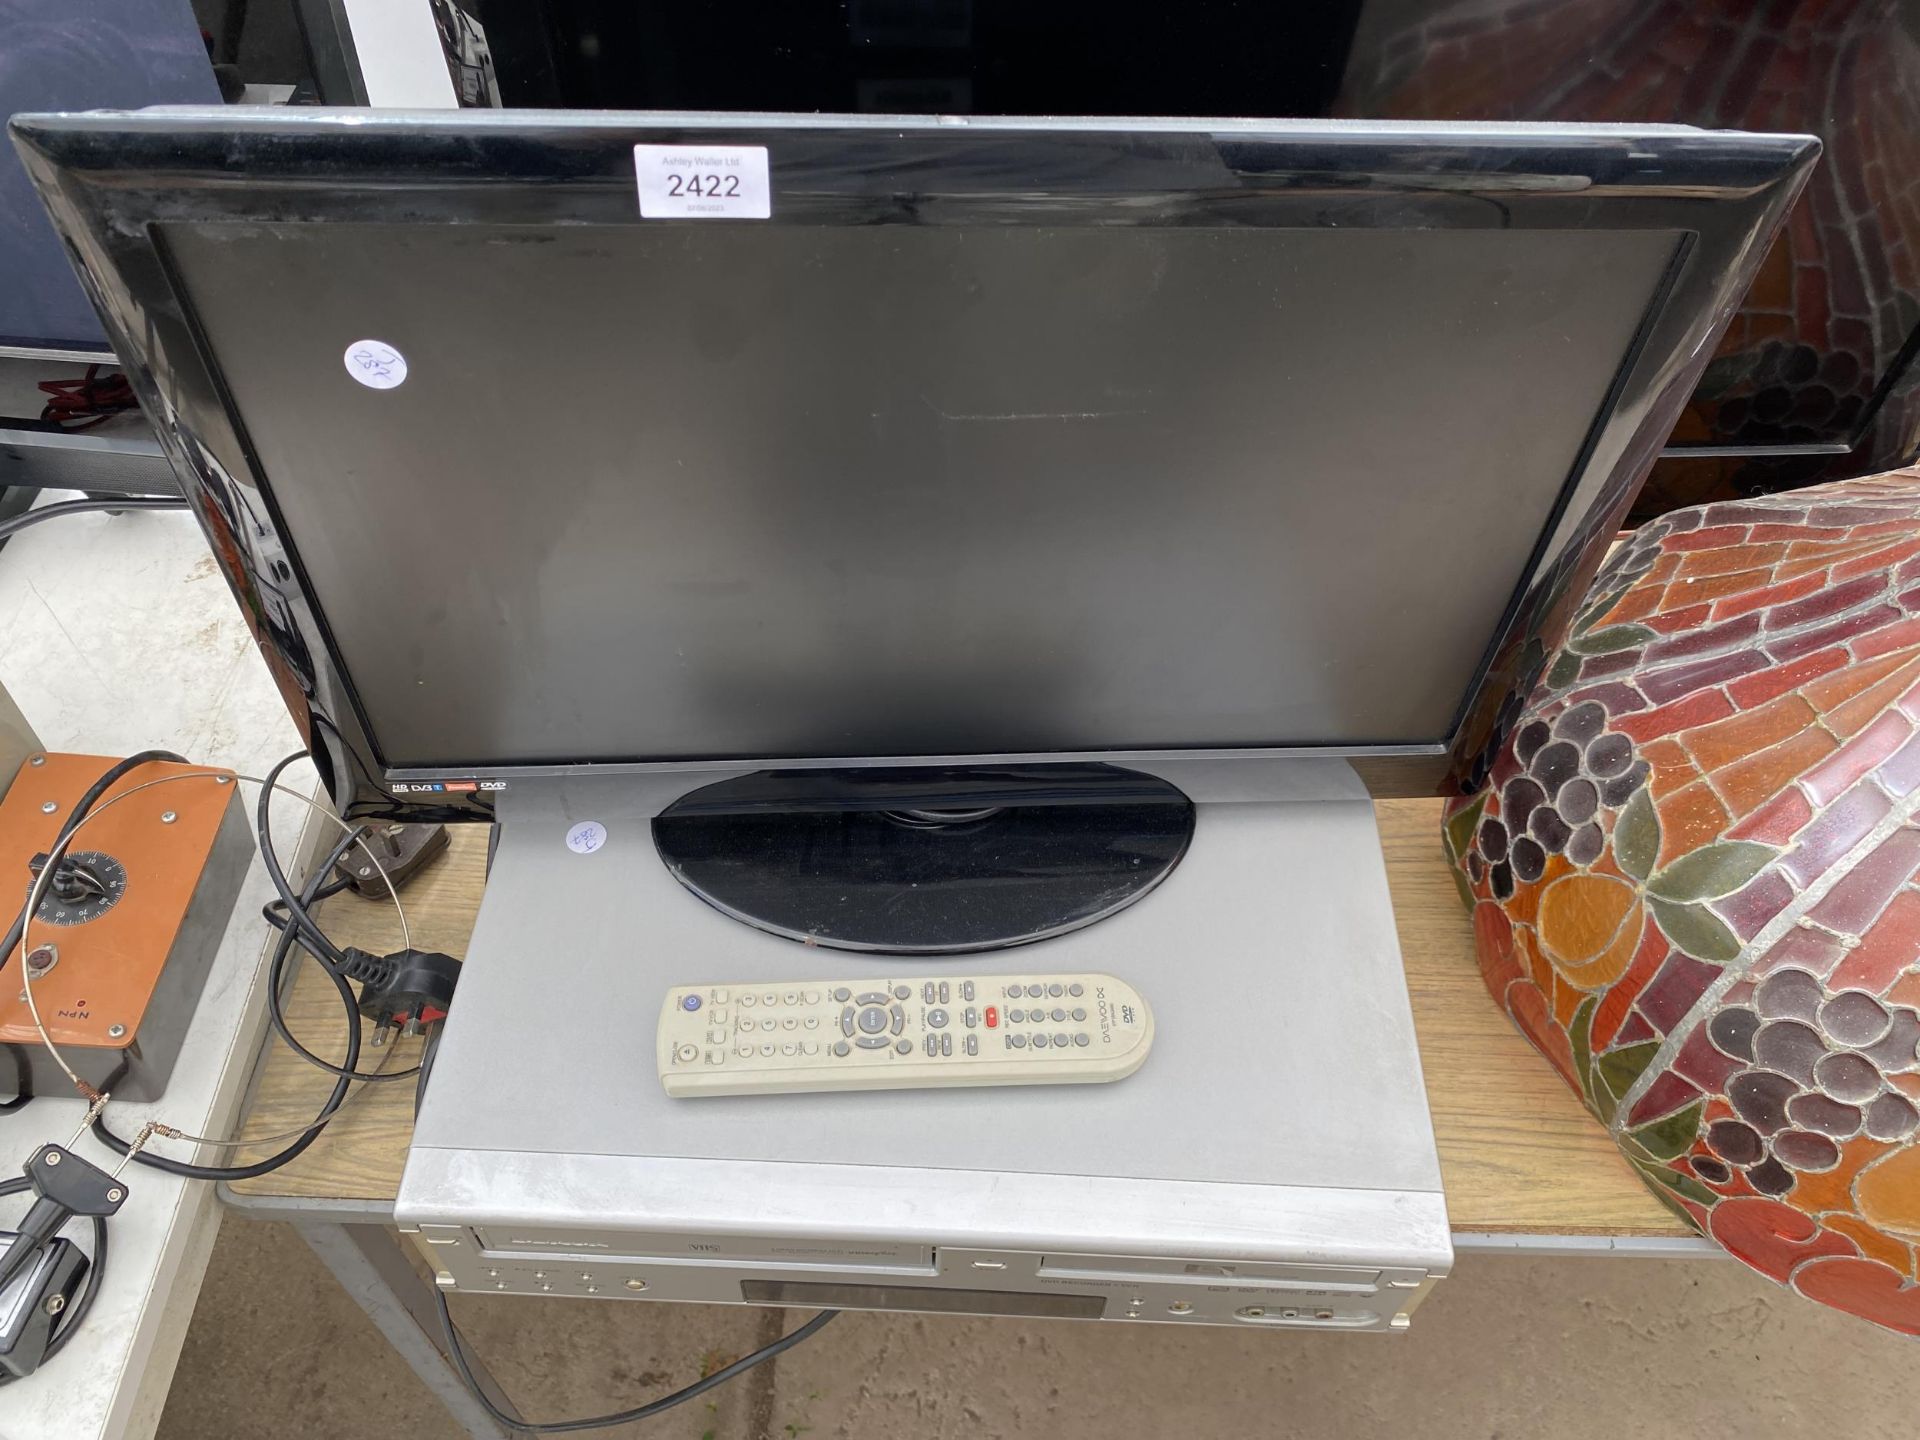 A 22" TELEVISION AND A DAEWOO VHS/DVD PLAYER